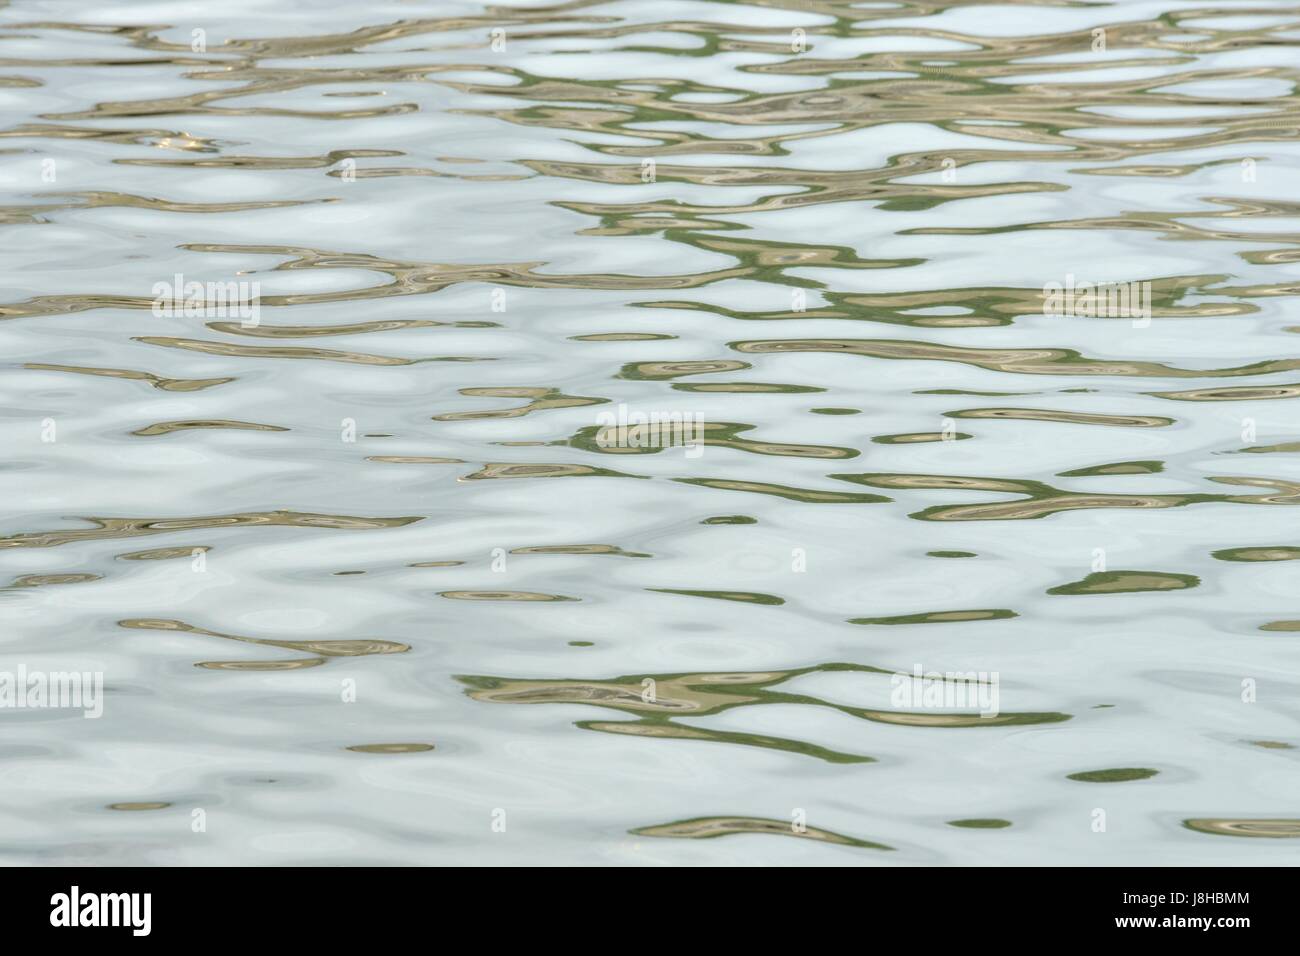 Abstract image created by reflections in  water Stock Photo